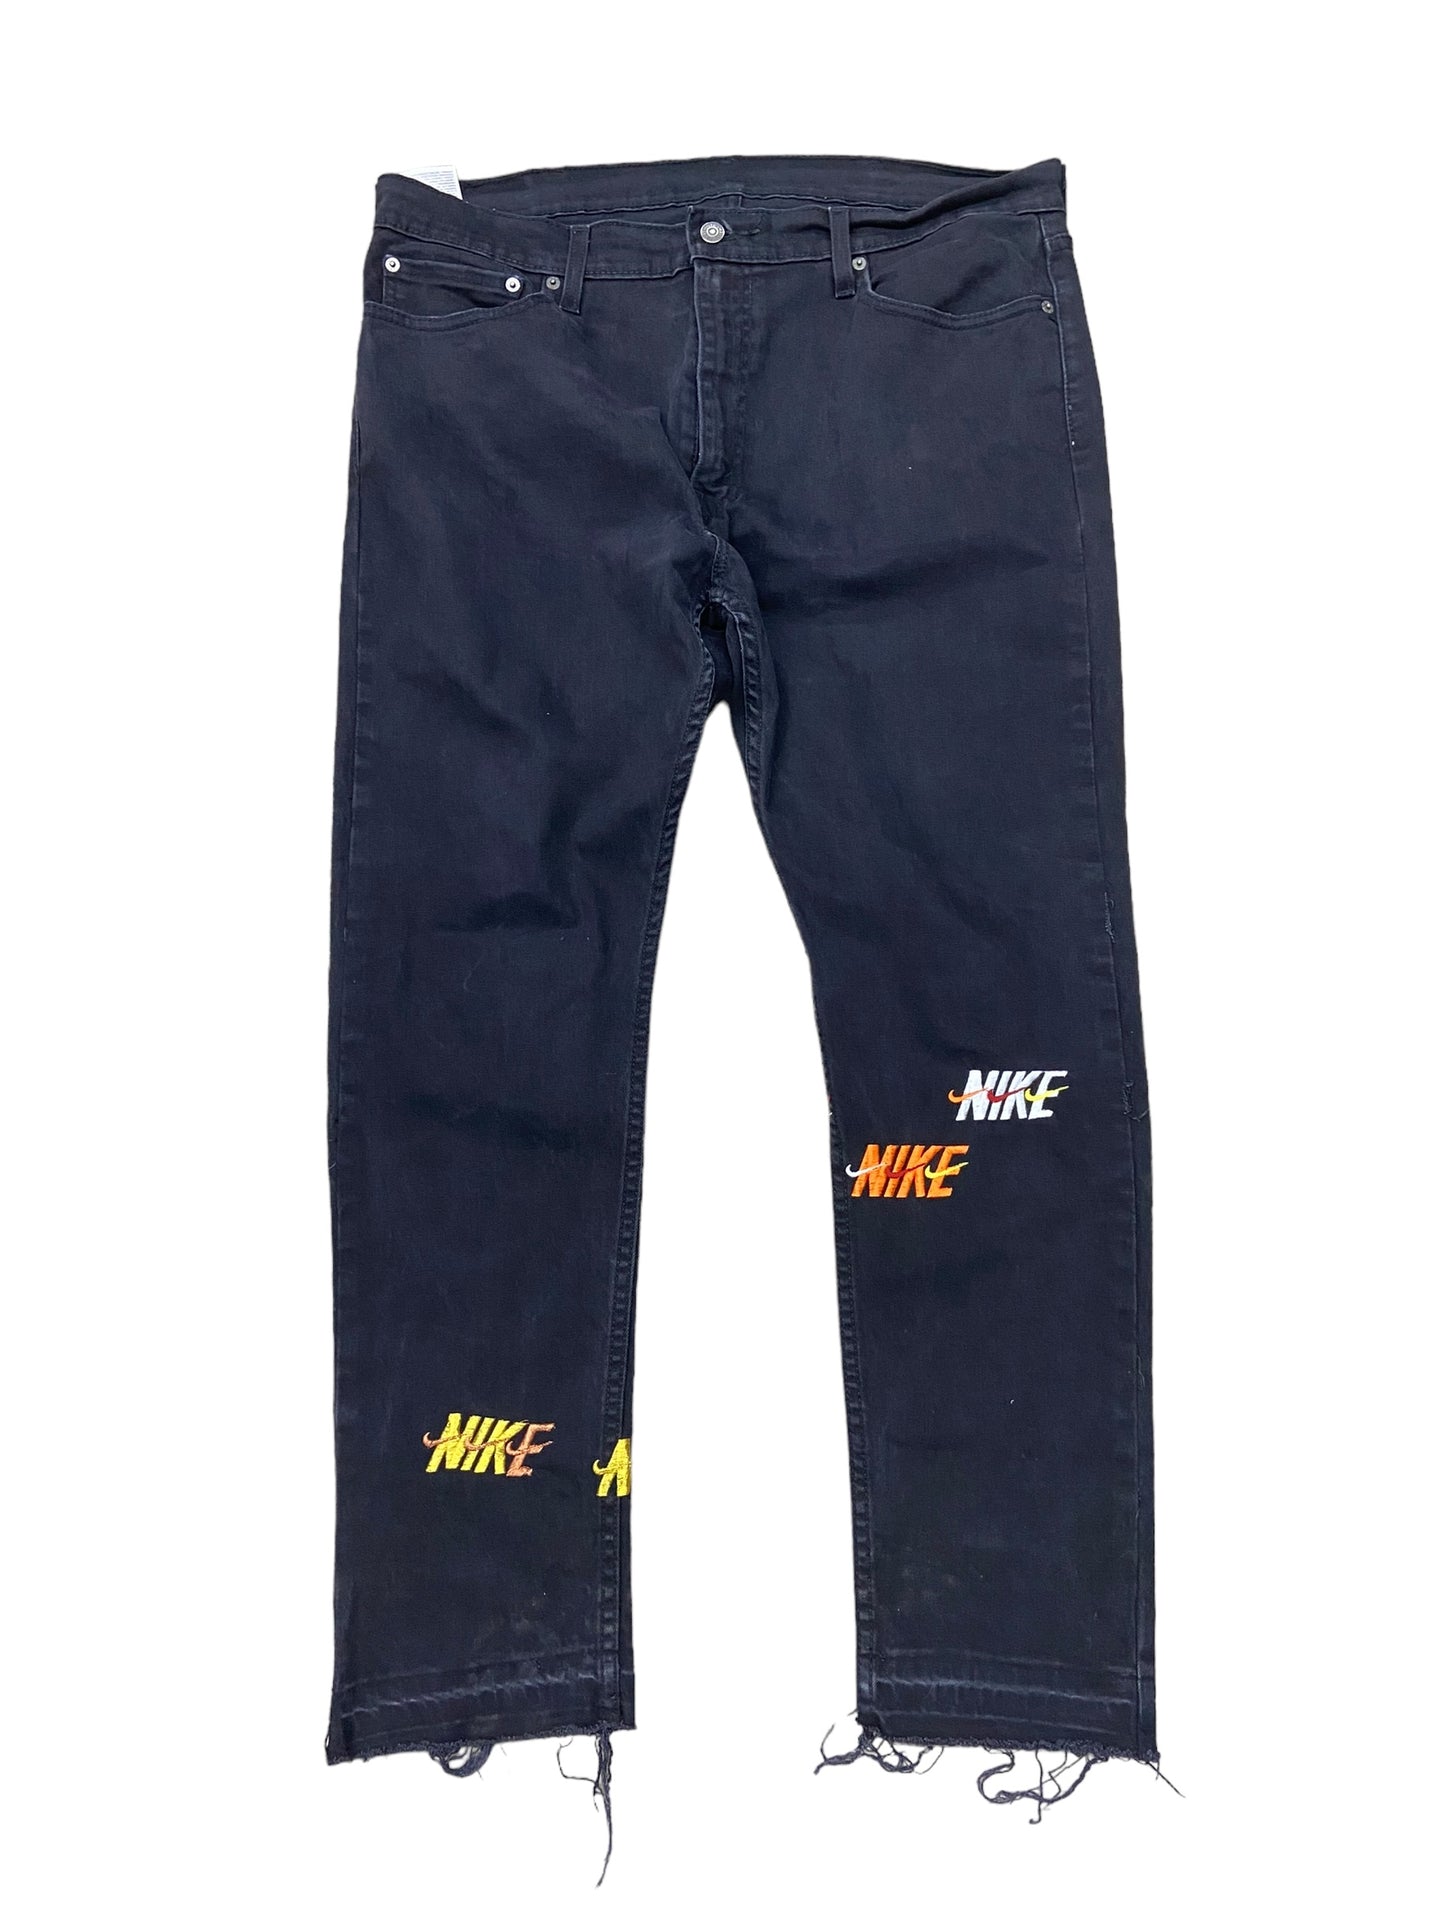 Preowned Custom Embroidered Levis "Nike" Jeans Sz 38x30